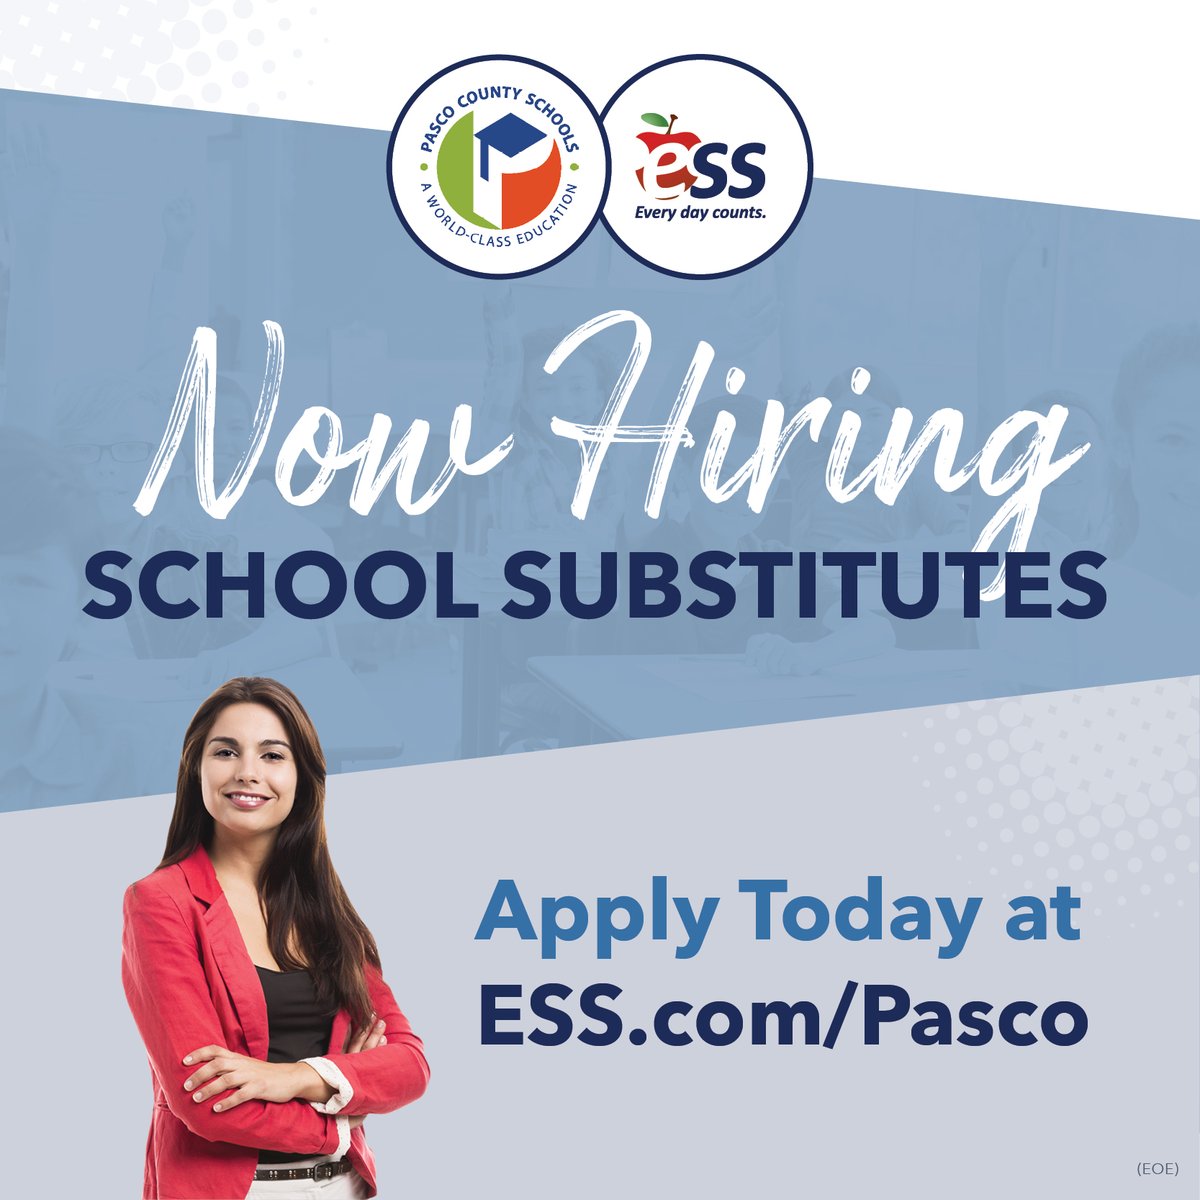 ESS is the nation’s largest education management company and has partnered with Pasco County Schools to provide substitute teaching staff support.

Join the ESS Pasco team by applying at https://t.co/8O7c4PteBe

Contact Jenny Hacker at jhacker@ess.com for additional questions. https://t.co/ZmTyvtdMet